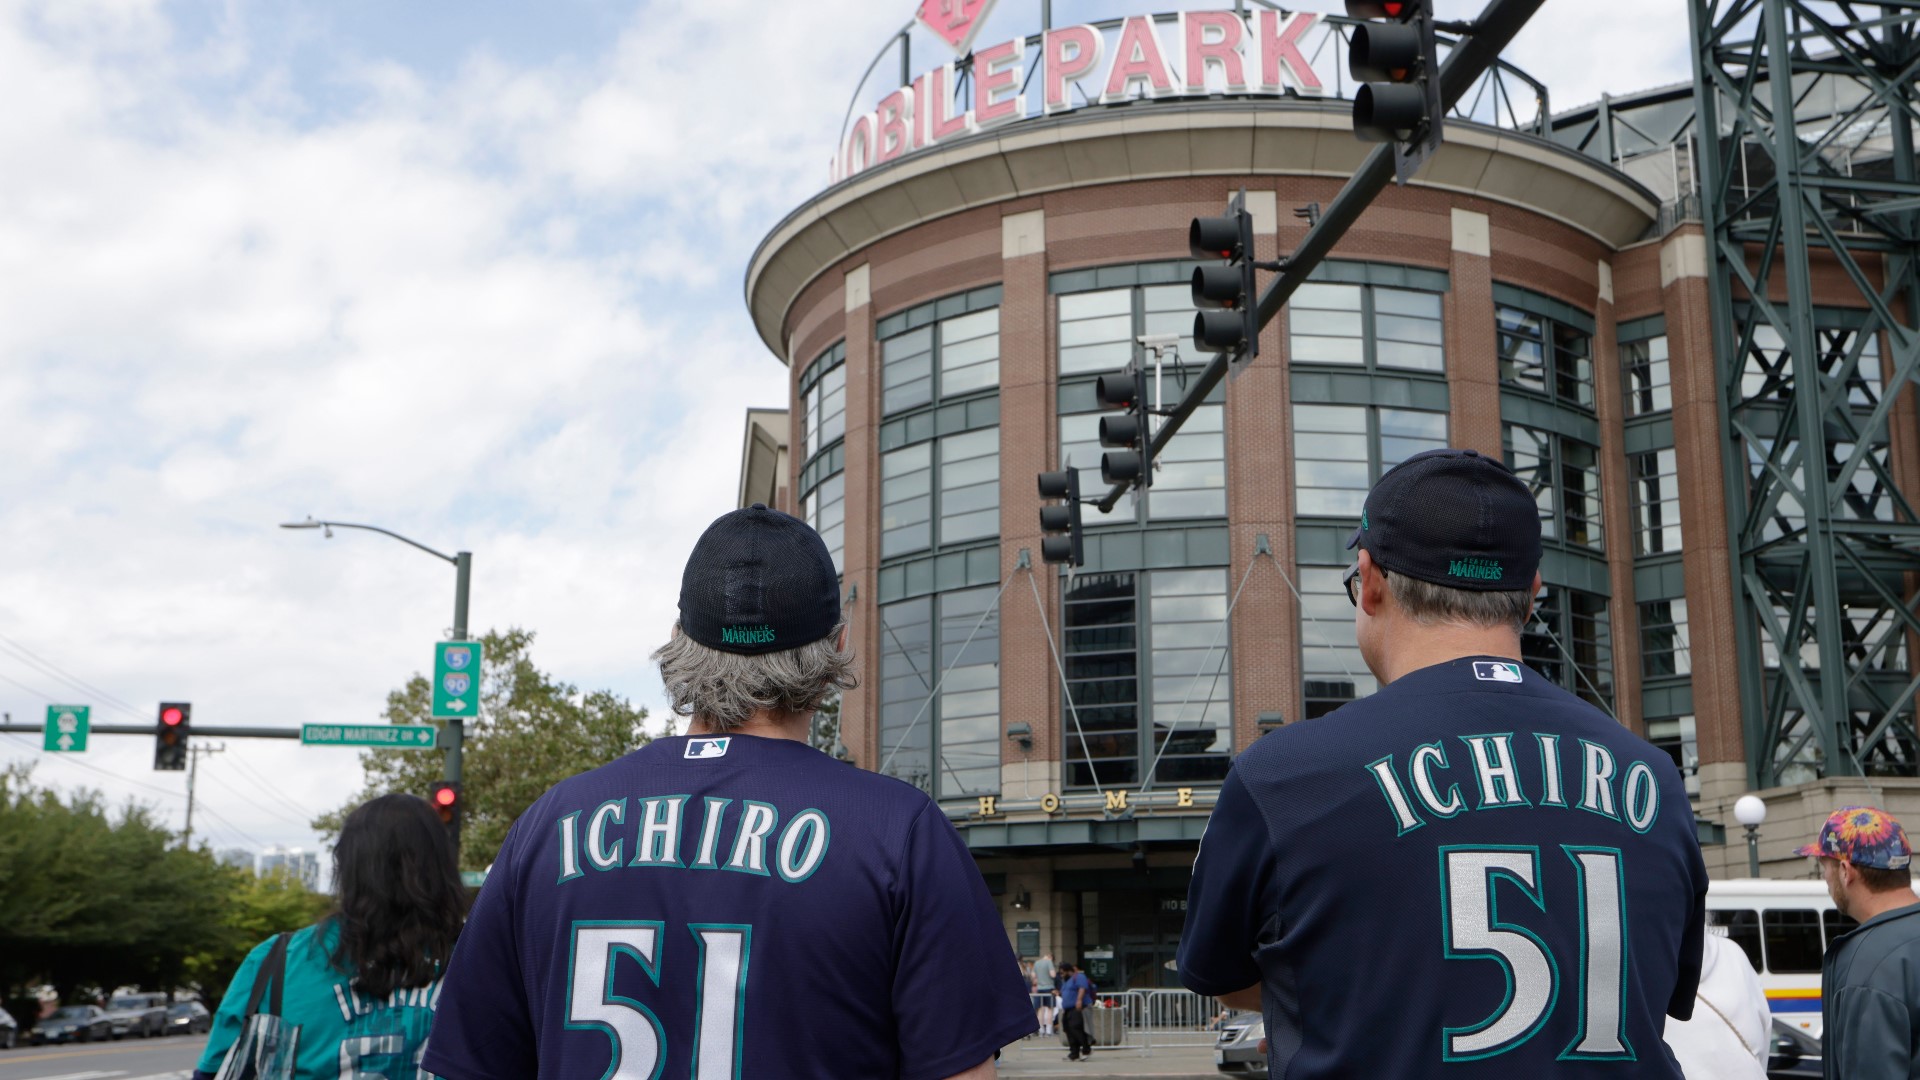 Seattle Mariners - It's '90s Night tonight in Houston and we are